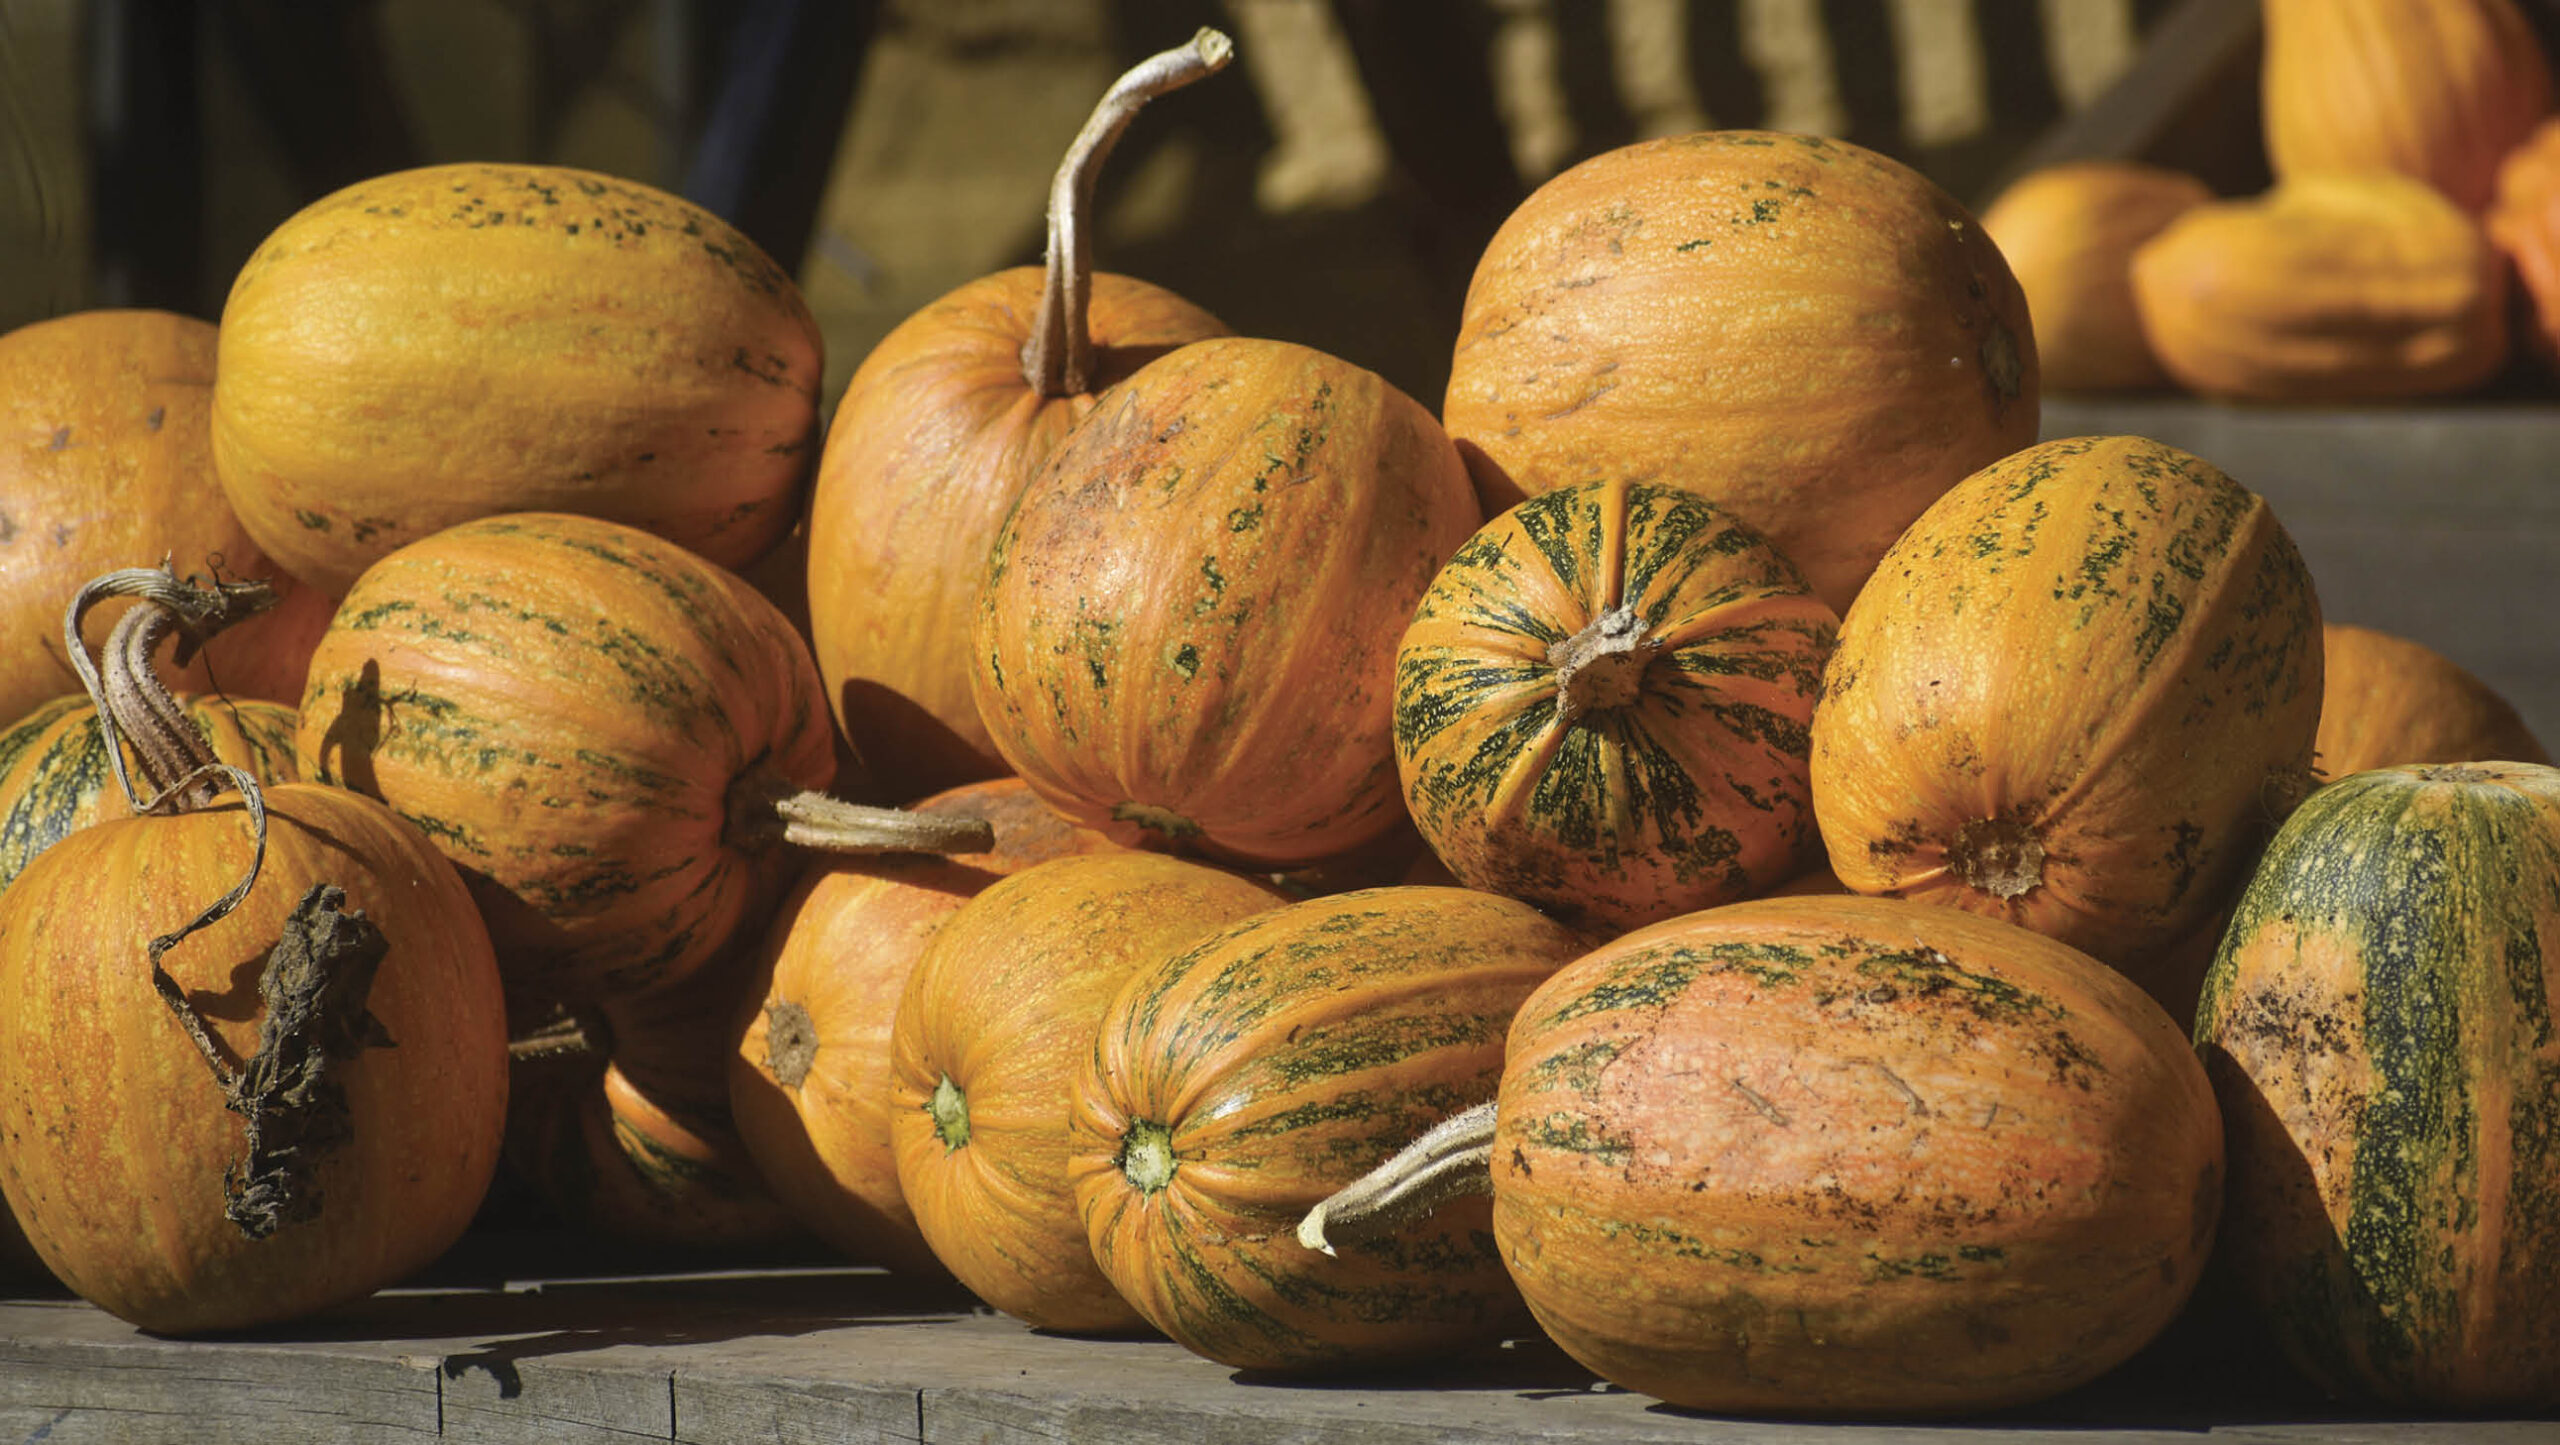 'Lady Godiva' is one variety of hull-less pumpkins.